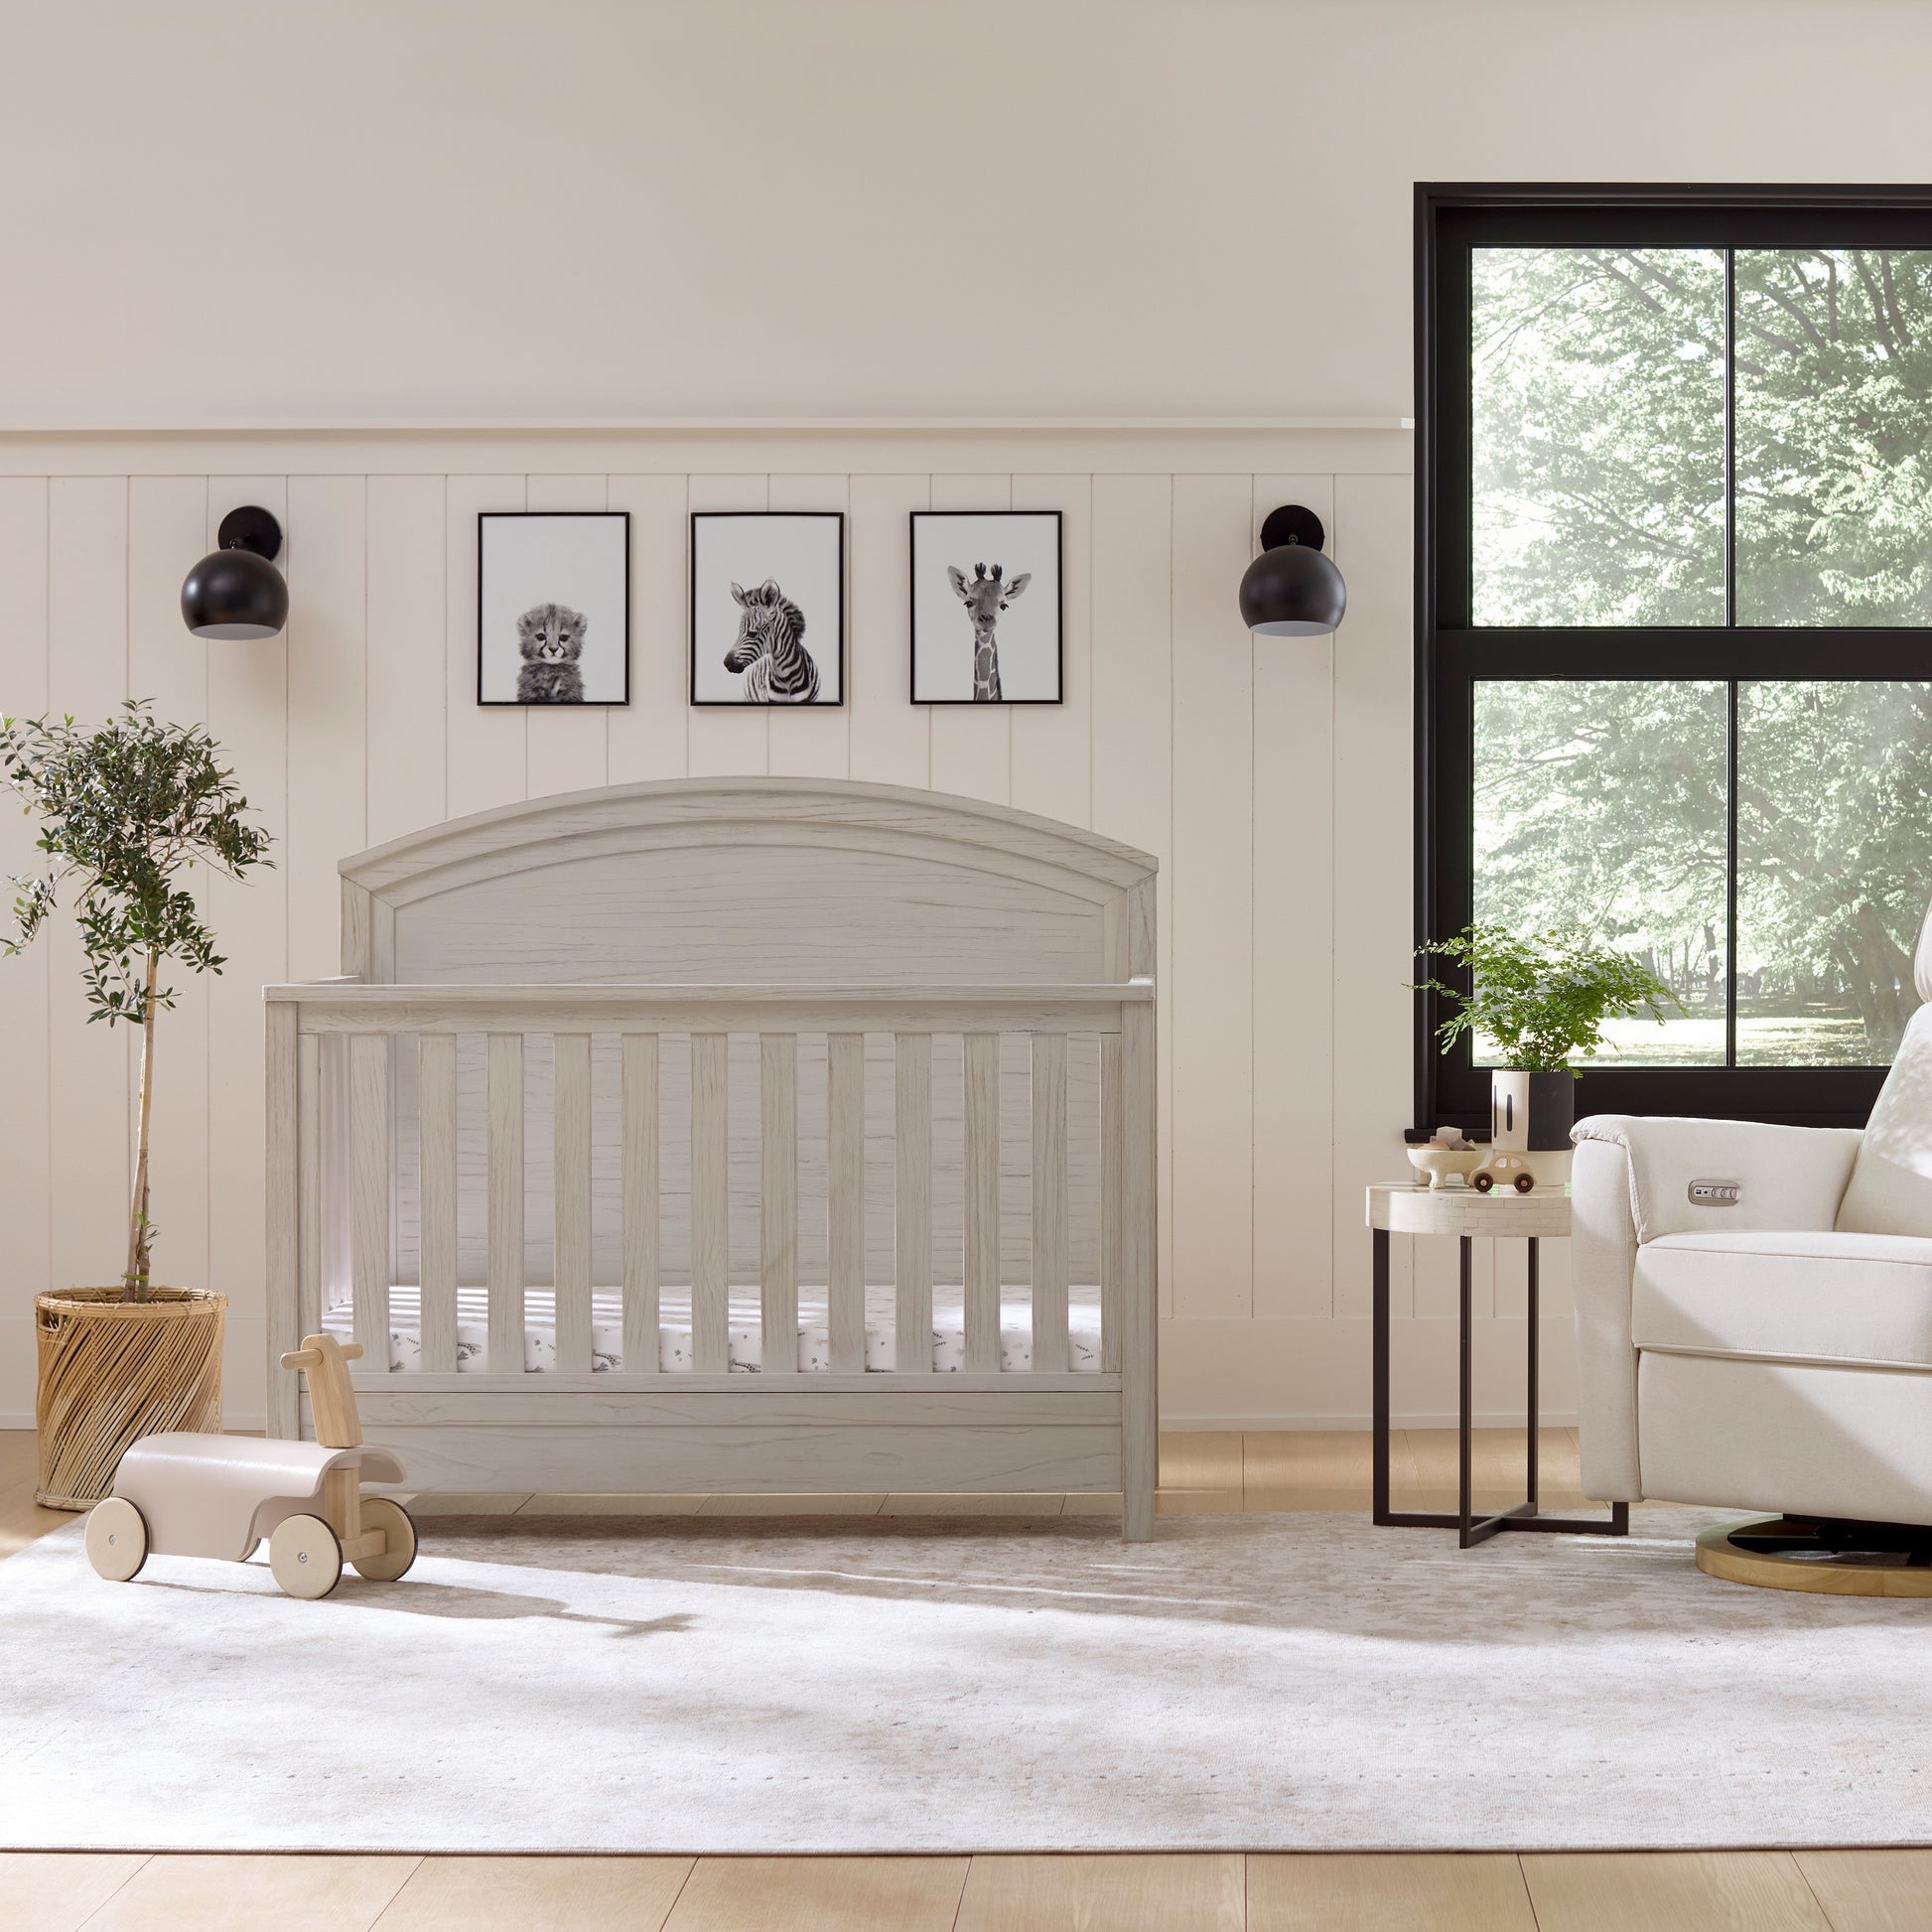 Hemsted 4-in-1 Convertible Crib - White Driftwood - Twinkle Twinkle Little One